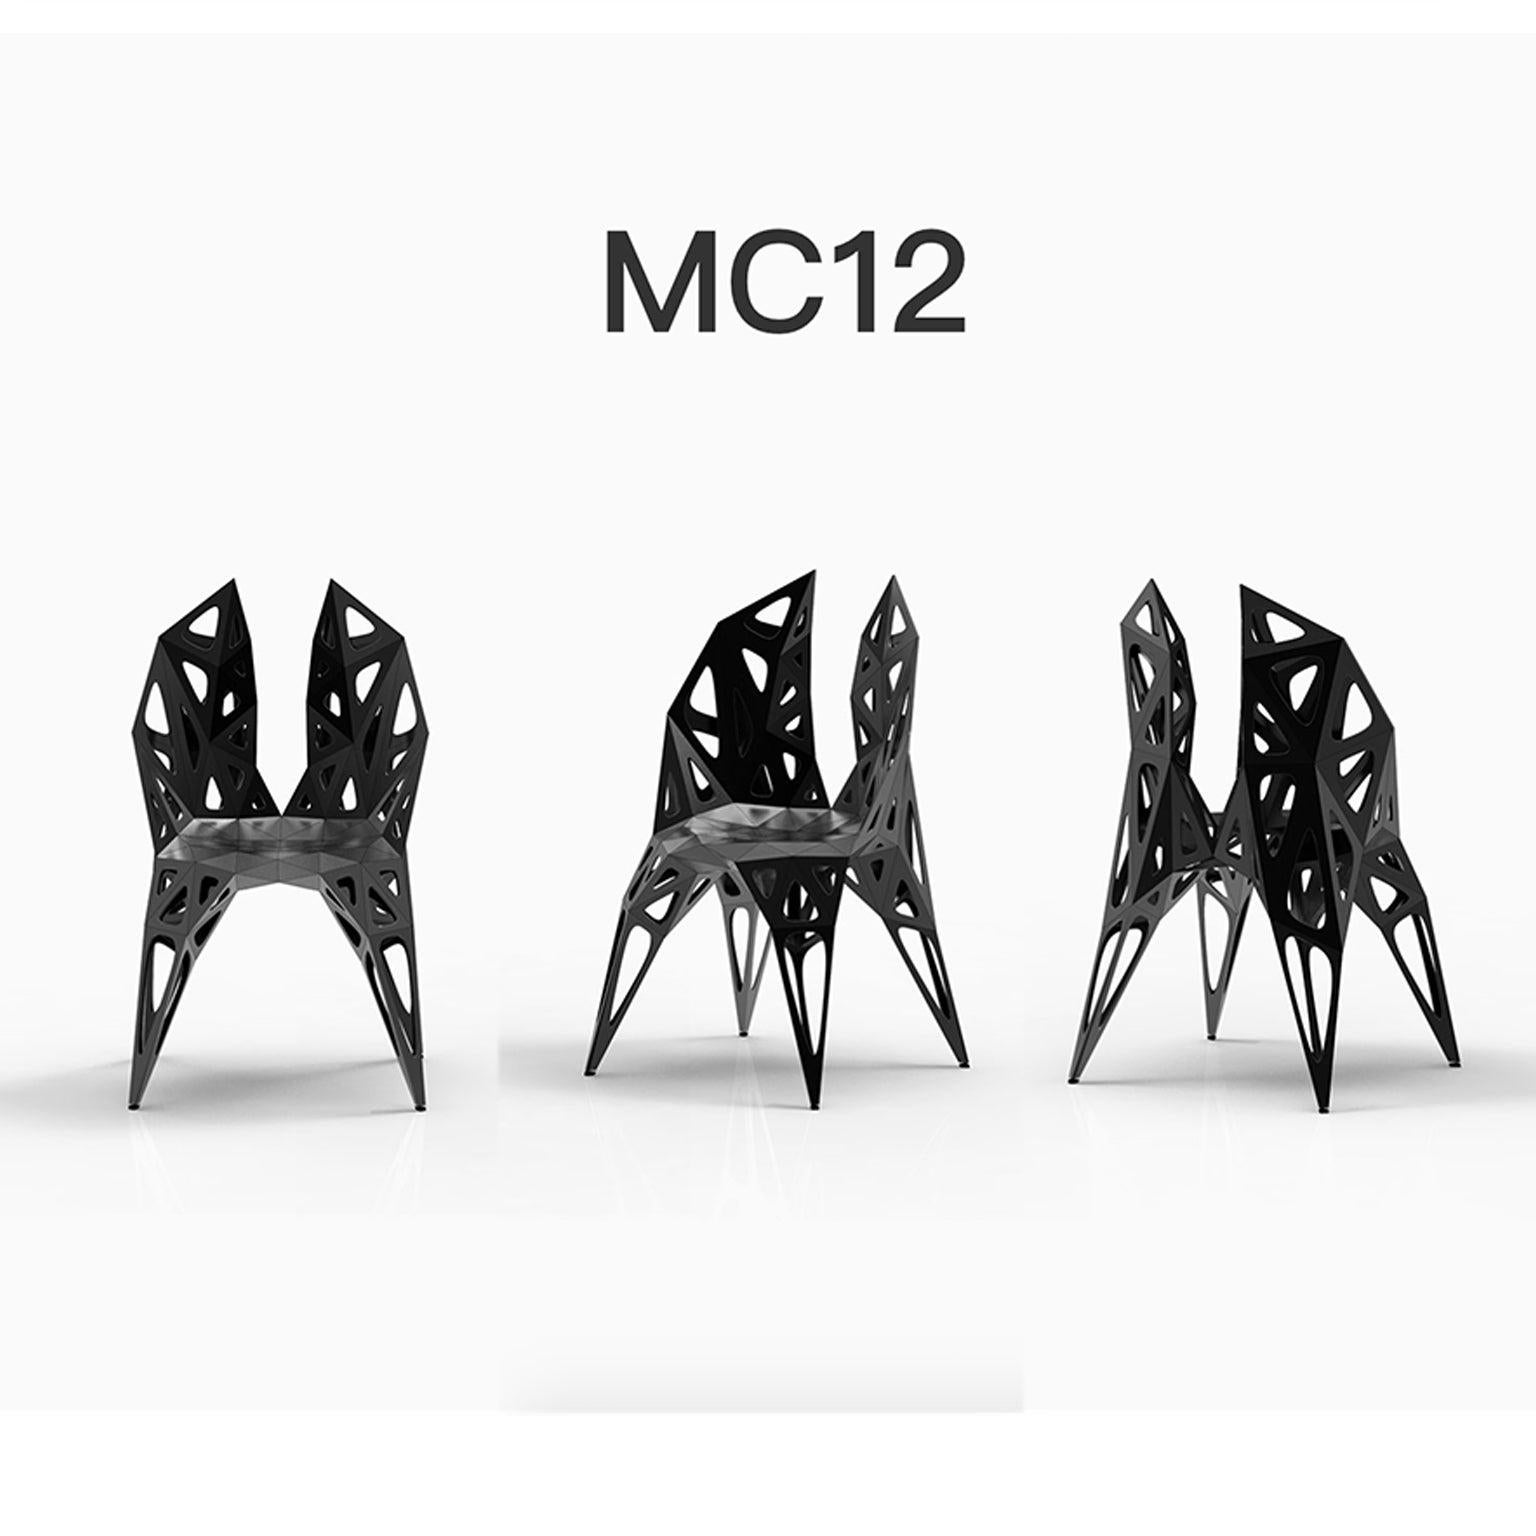 Outdoor and indoor
3 official types chairs or available
Solid
Dots
Frame
2 colors official or available or finish in polish or matte
Black
Silver

Furniture designer Zhoujie Zhang is known for the integration of automated digital design and